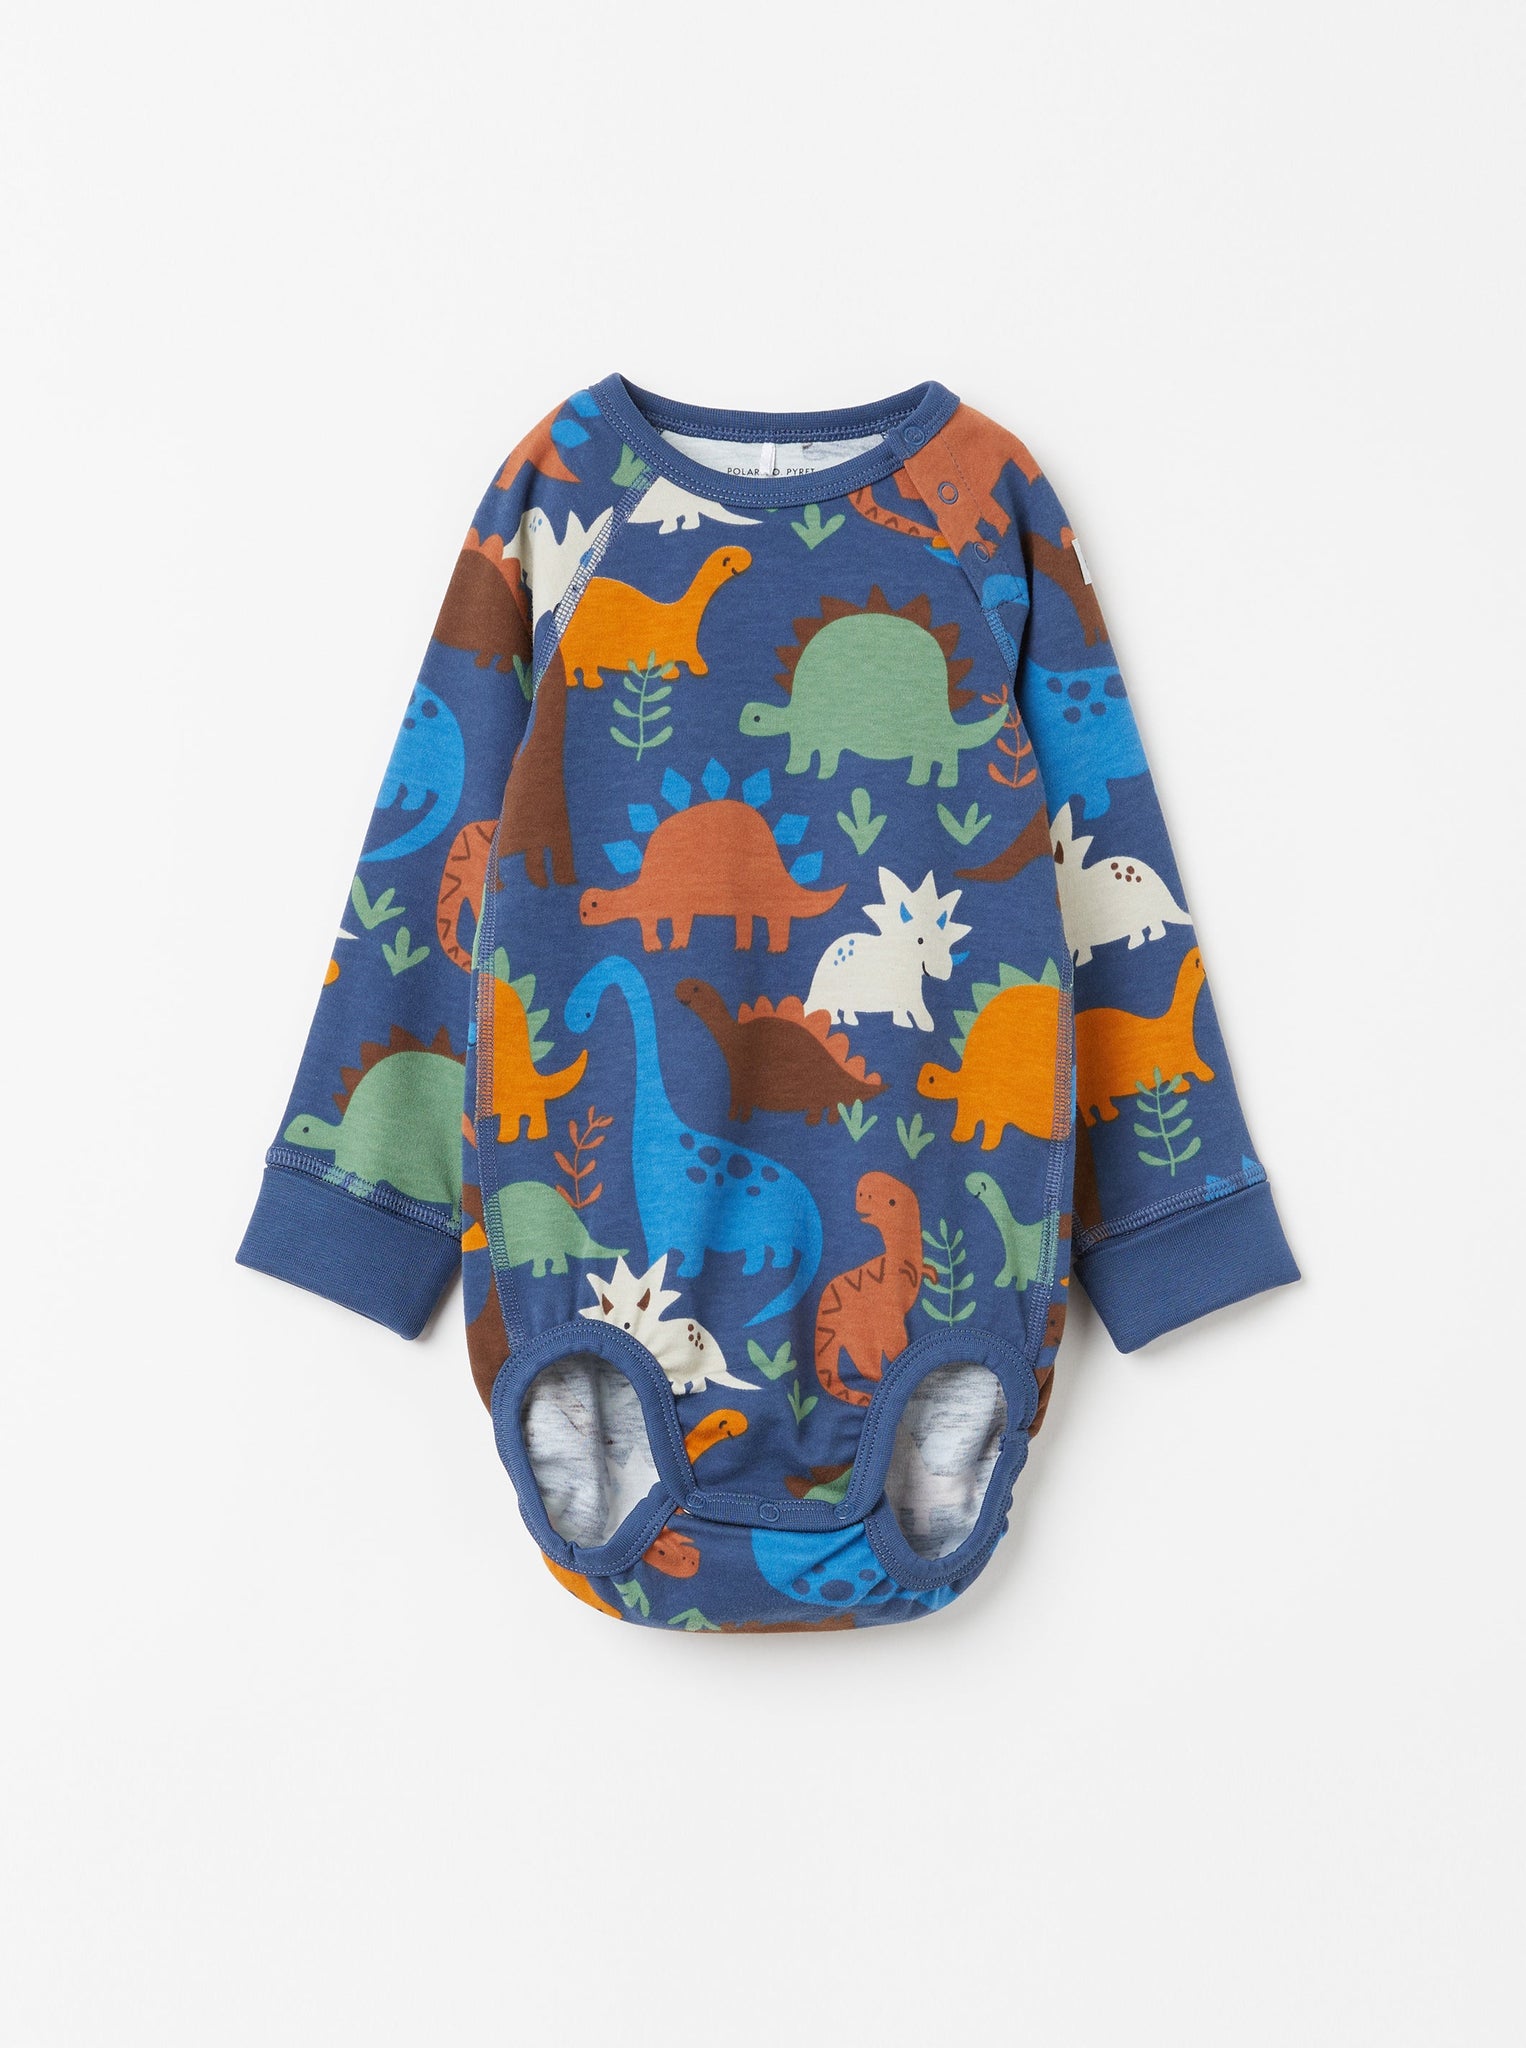 Dinosaur Print Blue Newborn Babygrow from the Polarn O. Pyret Kidswear collection. Clothes made using sustainably sourced materials.